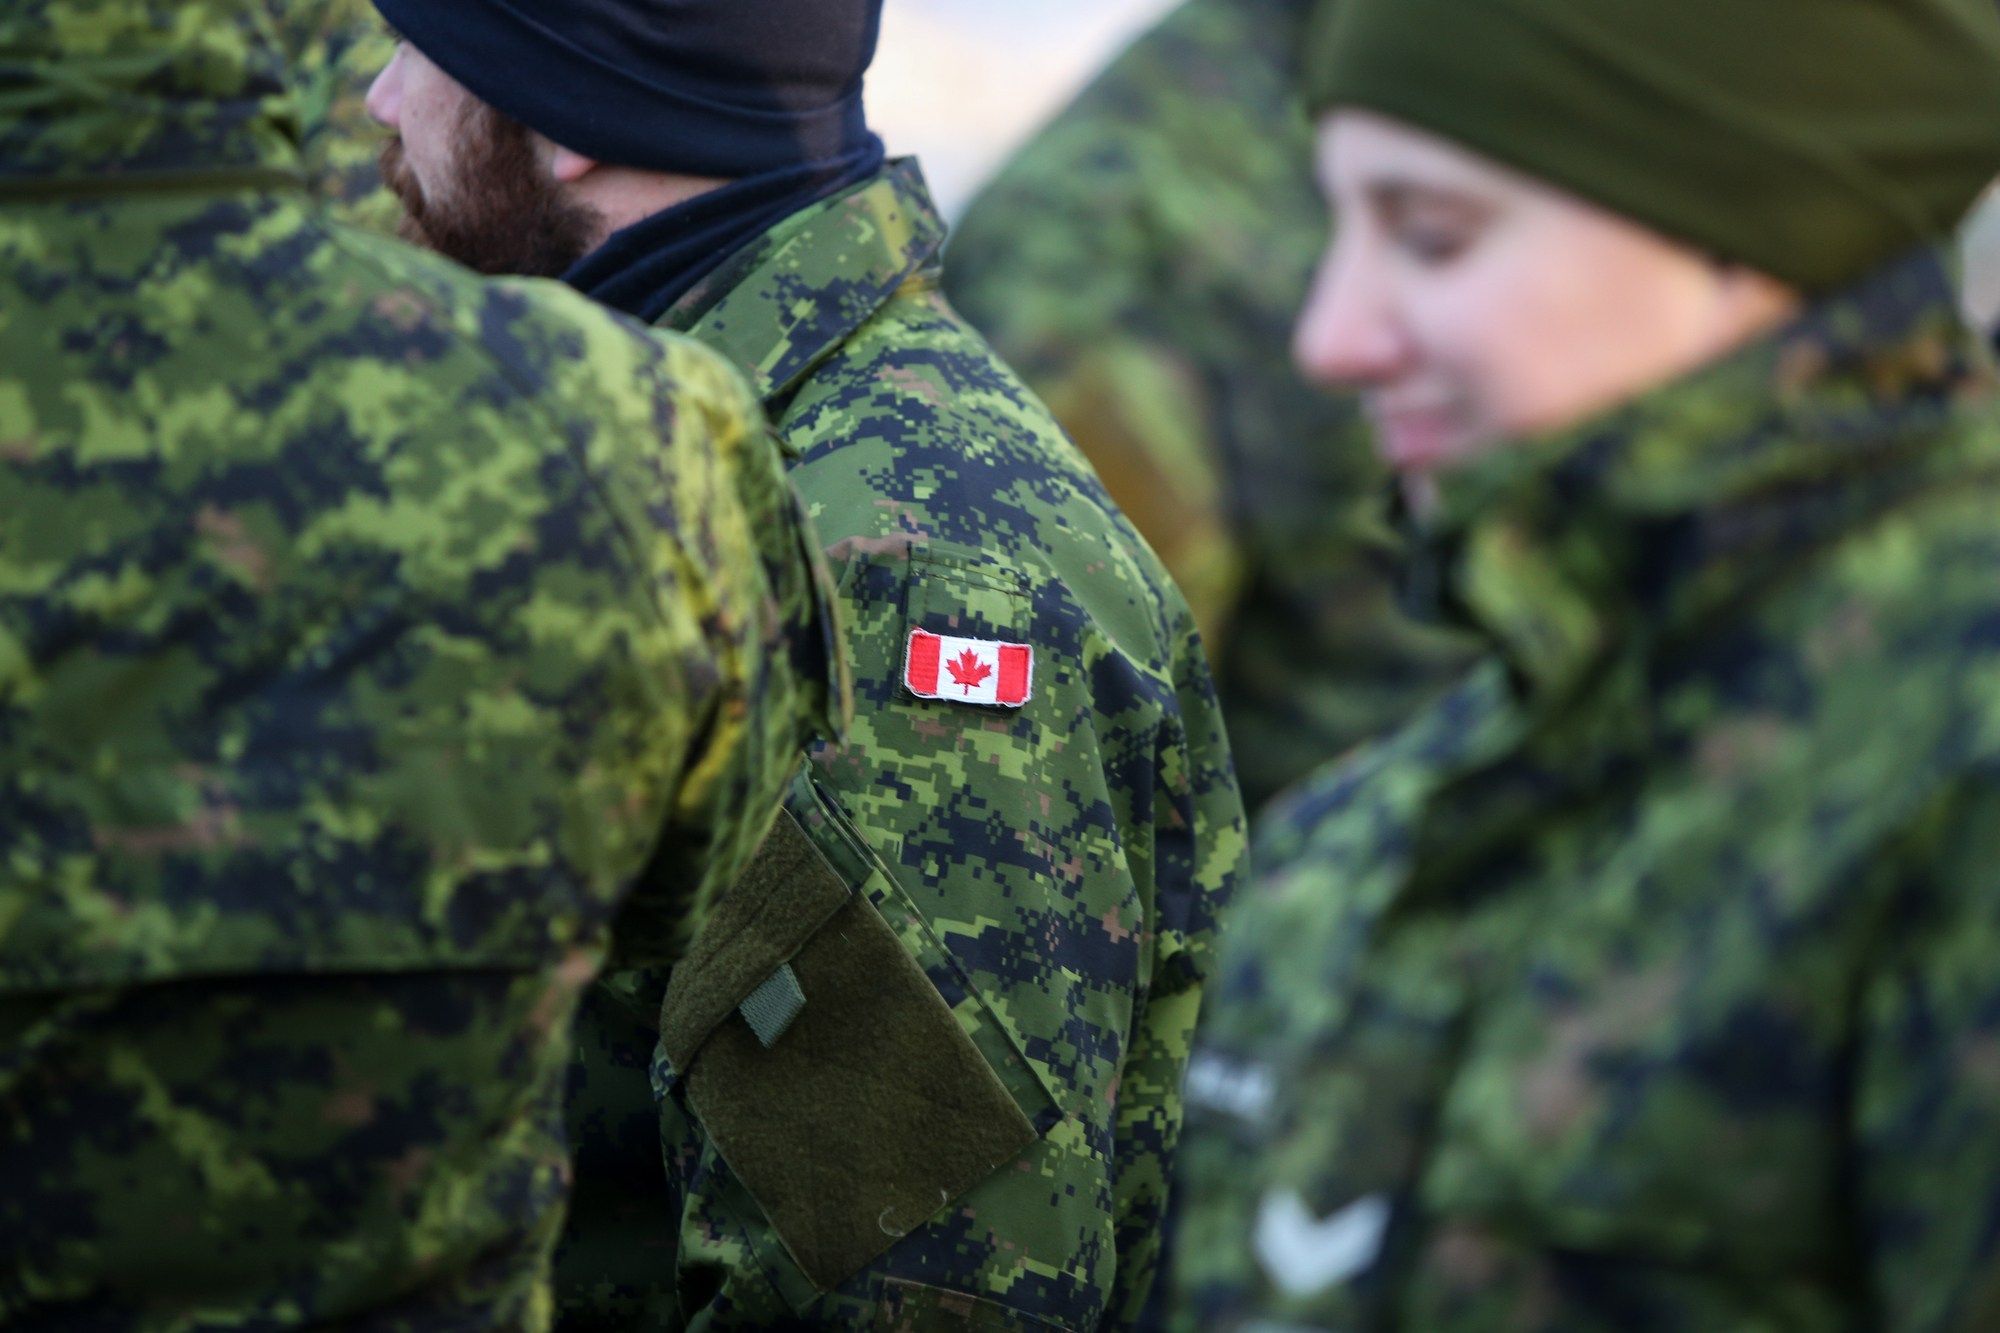 Group of Canadian armed forces regarding the lawsuits to be filed against mefloquine